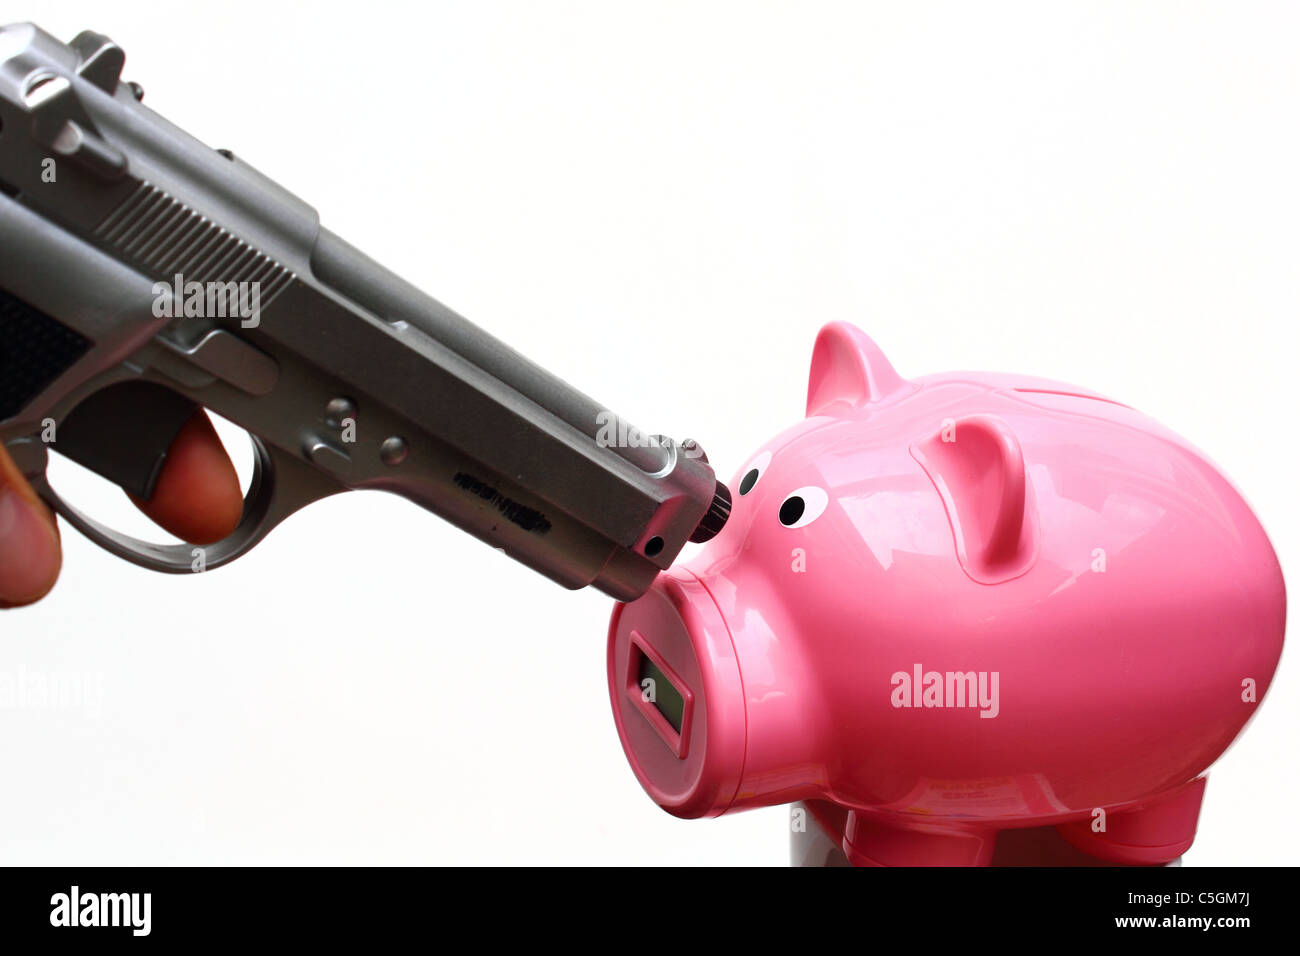 A silver colored gun is pointed towards a pink piggy bank. Stock Photo